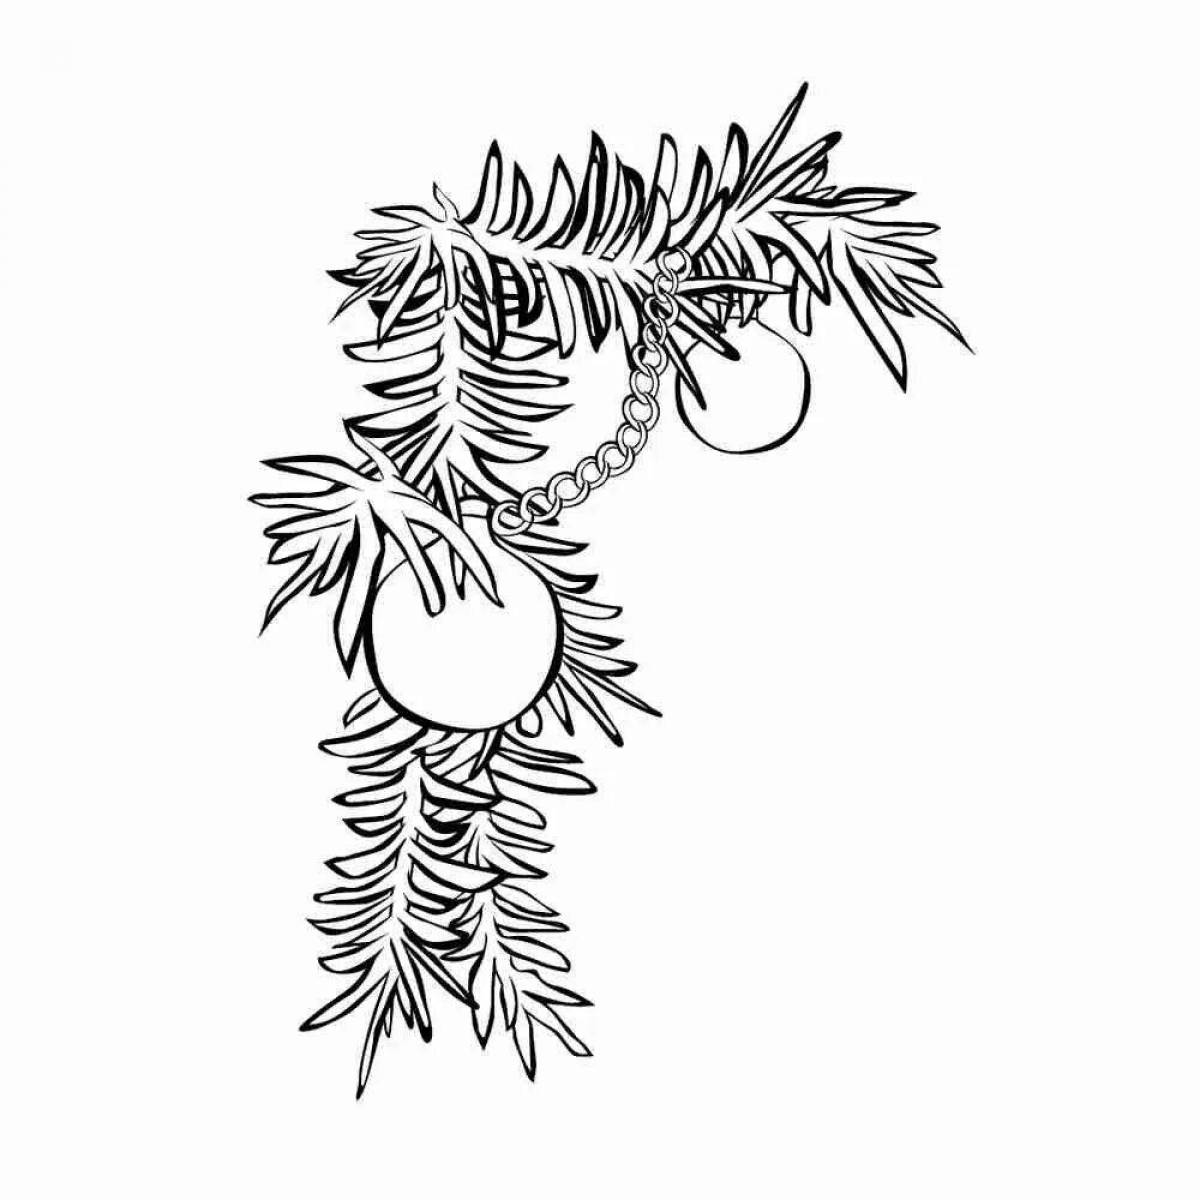 Coloring page shining spruce branch